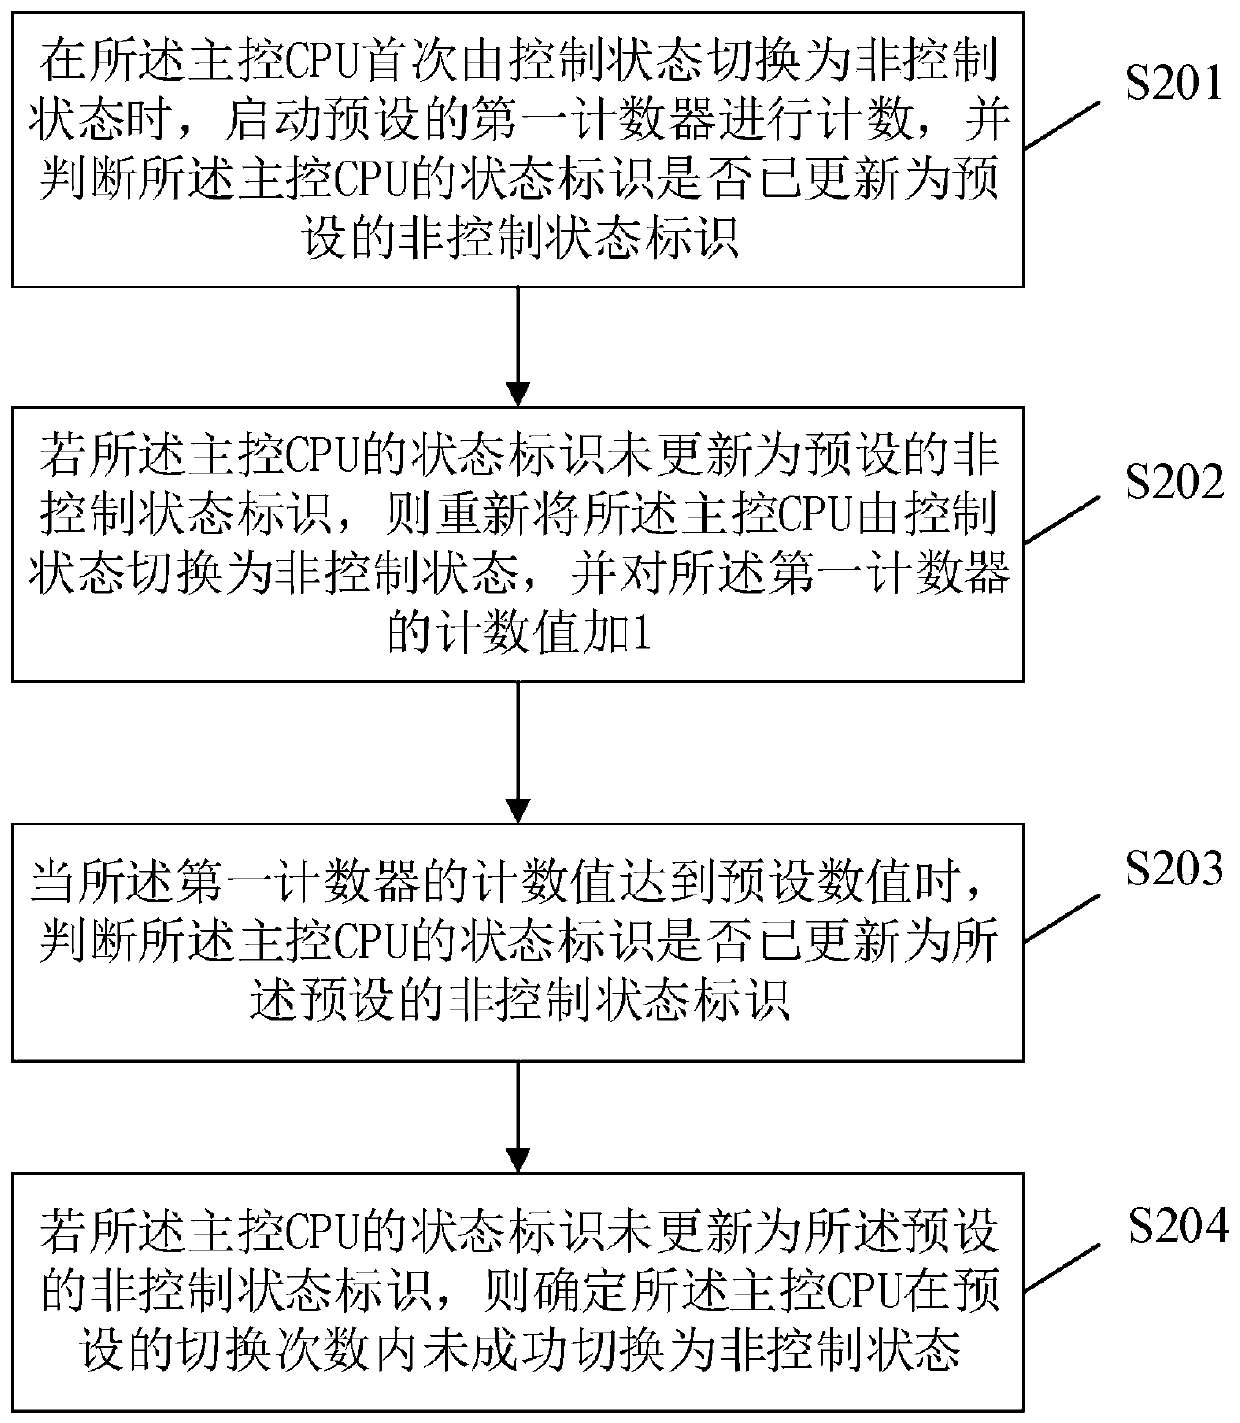 Dual-central processing unit (CPU) hot standby redundancy control method and device of braking control unit of brake